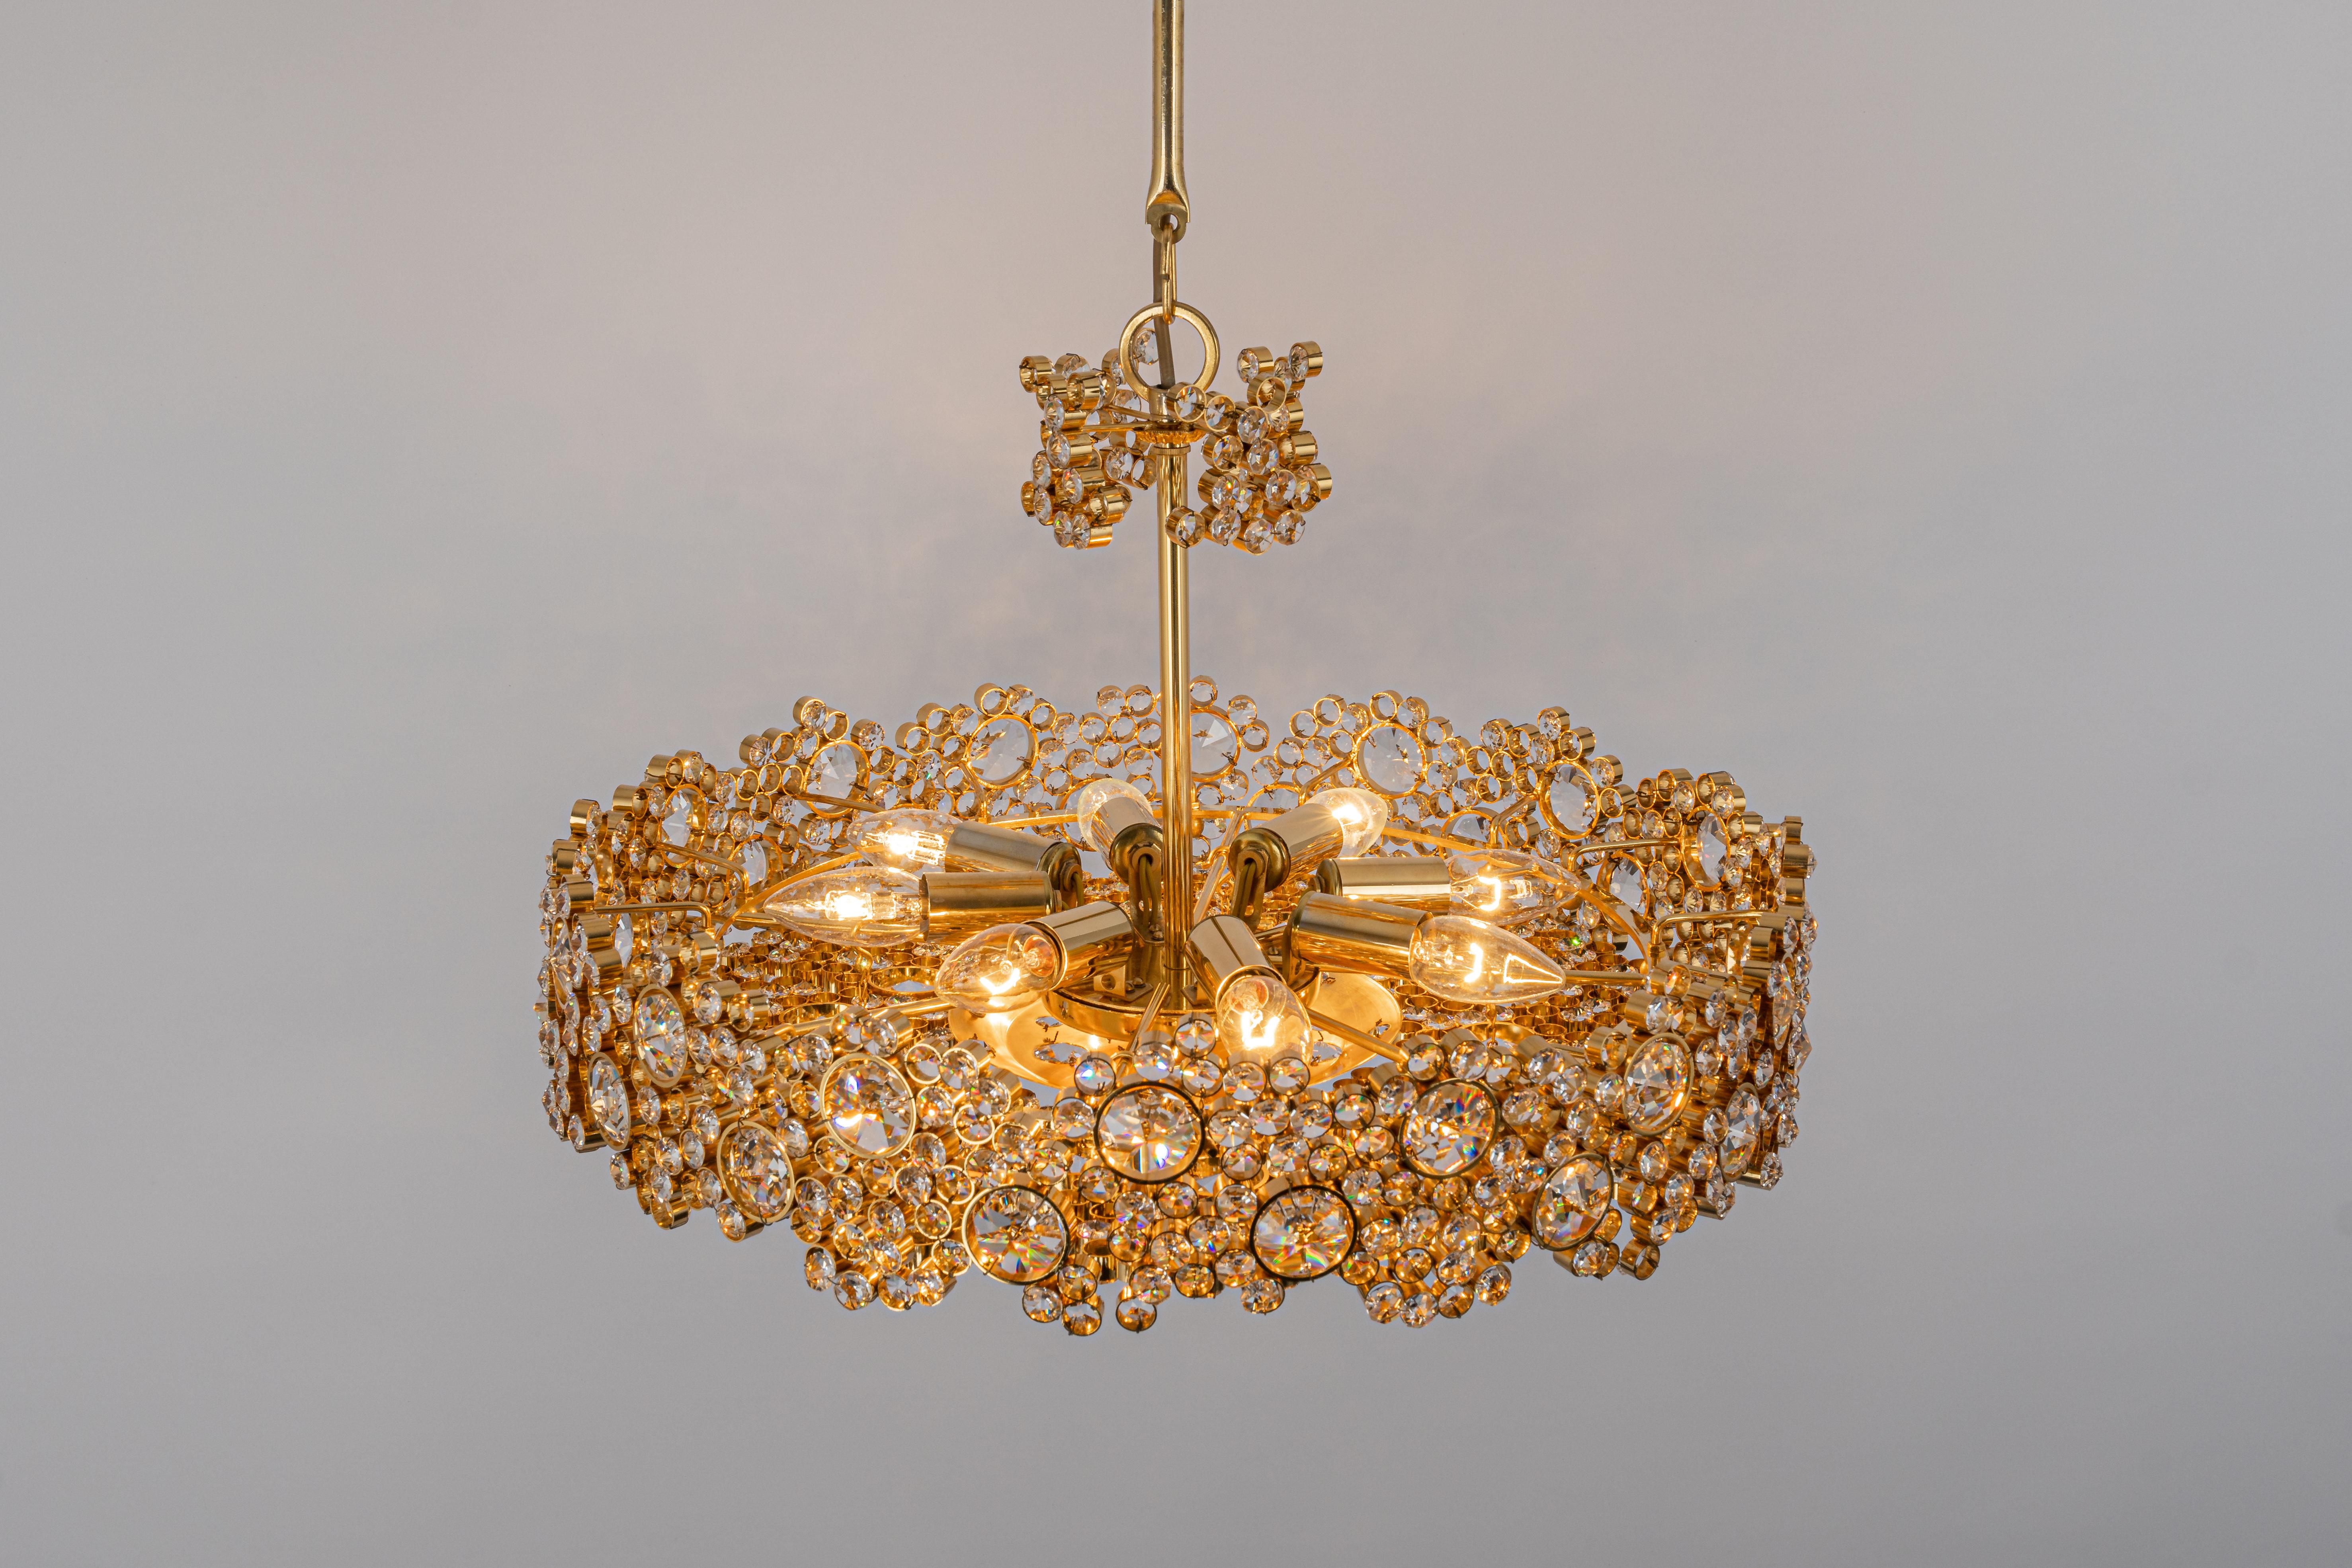 Gilt Brass and Crystal Glass Encrusted Chandeliers by Palwa, Germany, 1970s For Sale 6